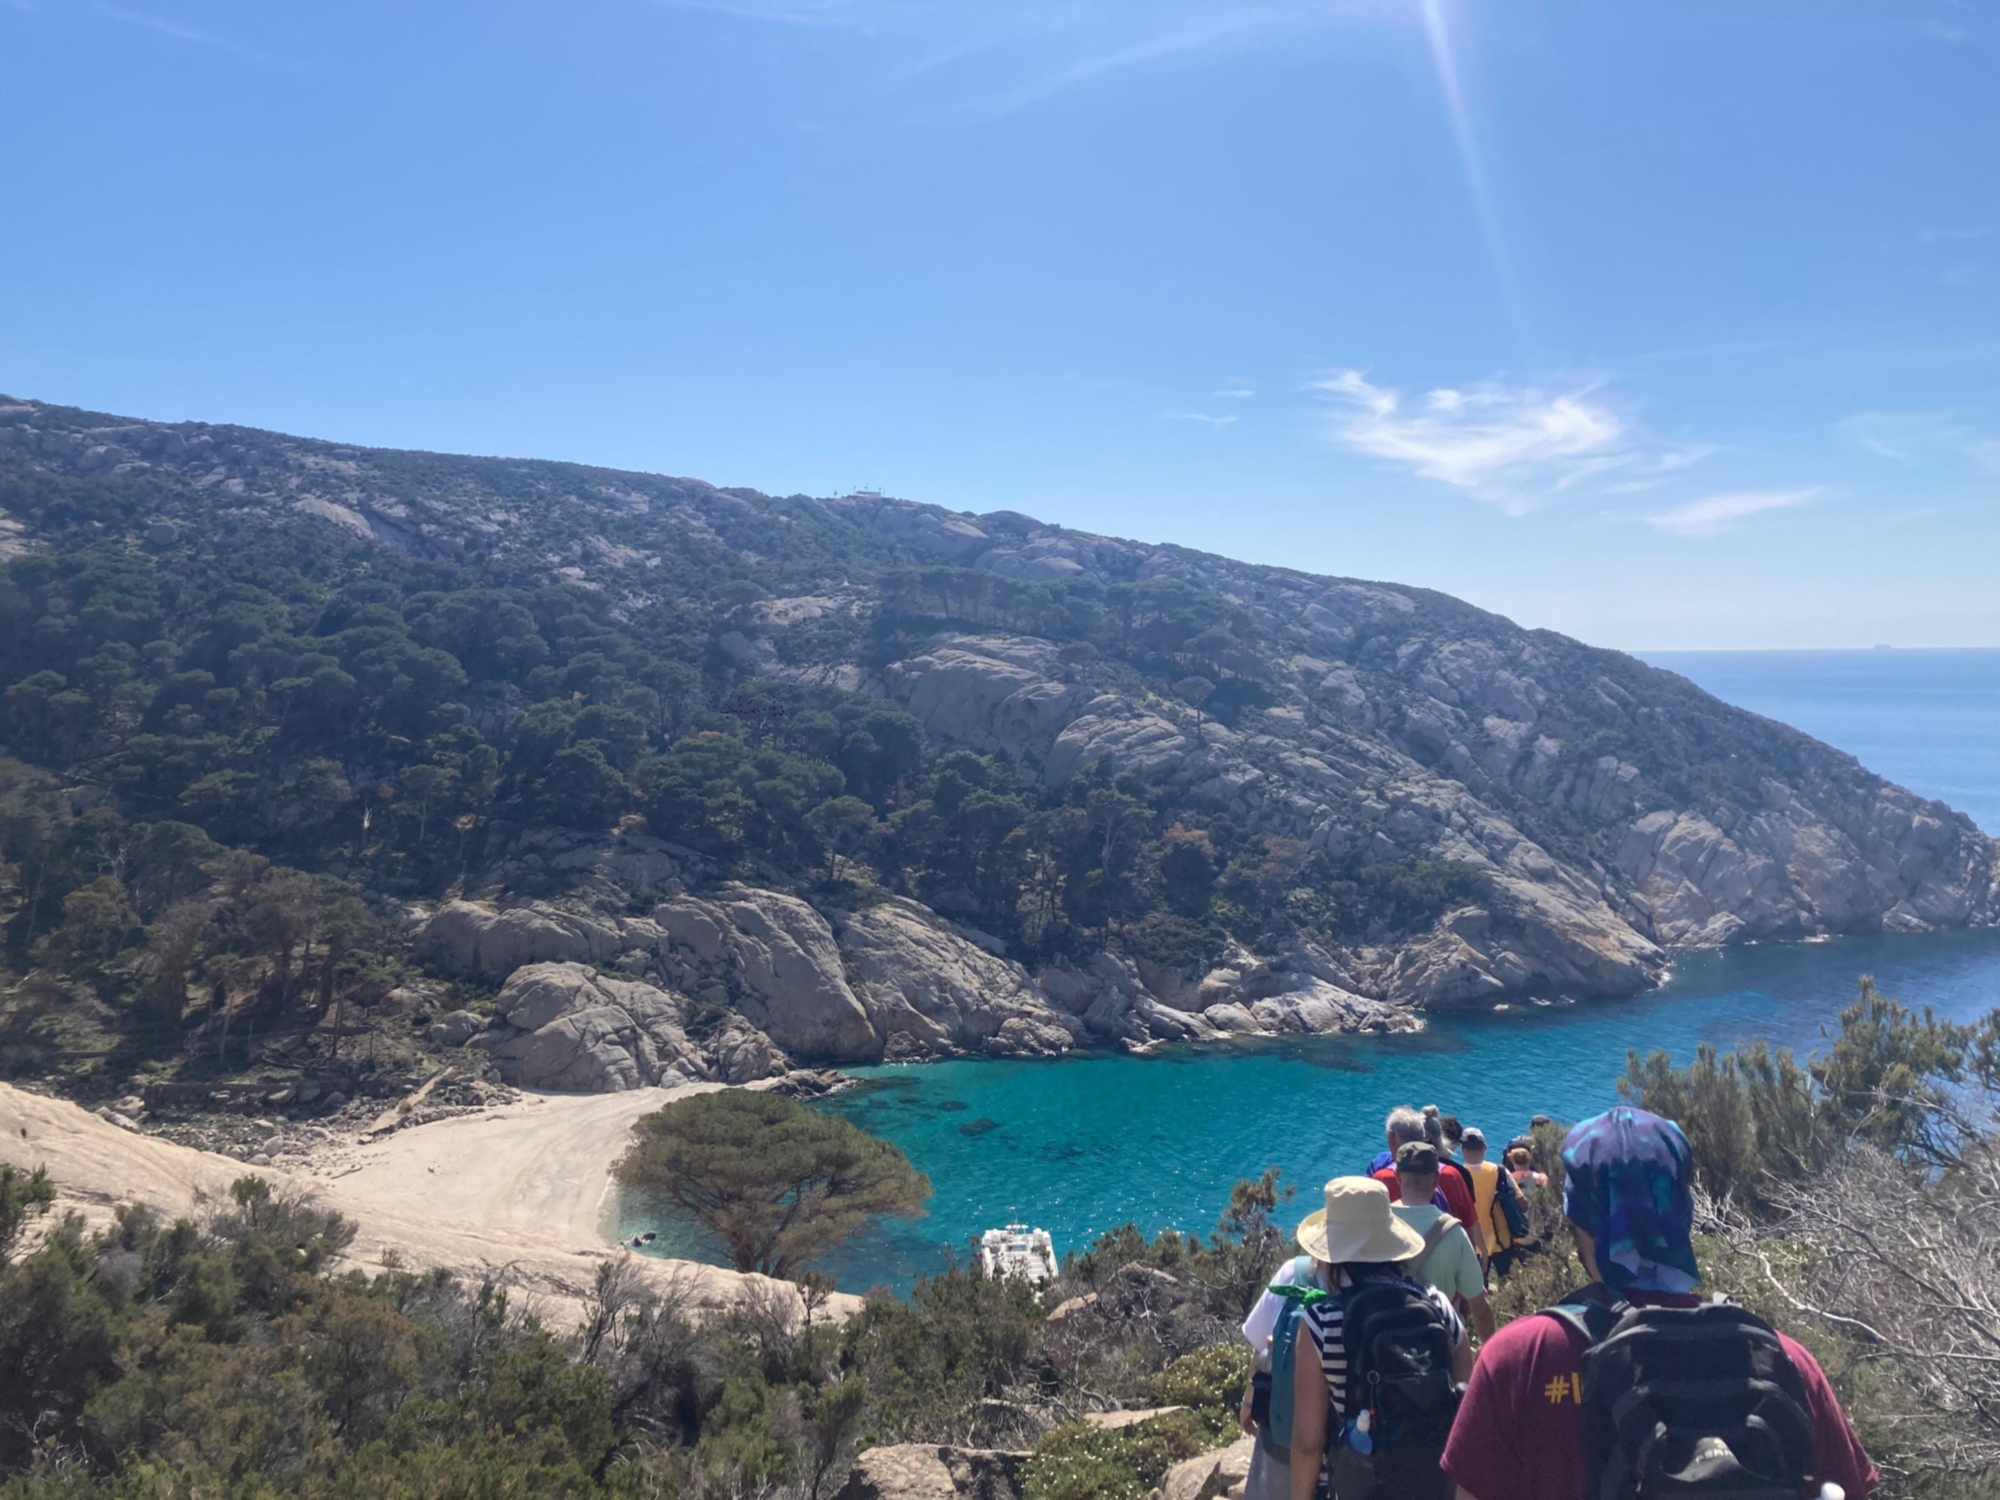 Hiking on the Montecristo Island in Tuscany